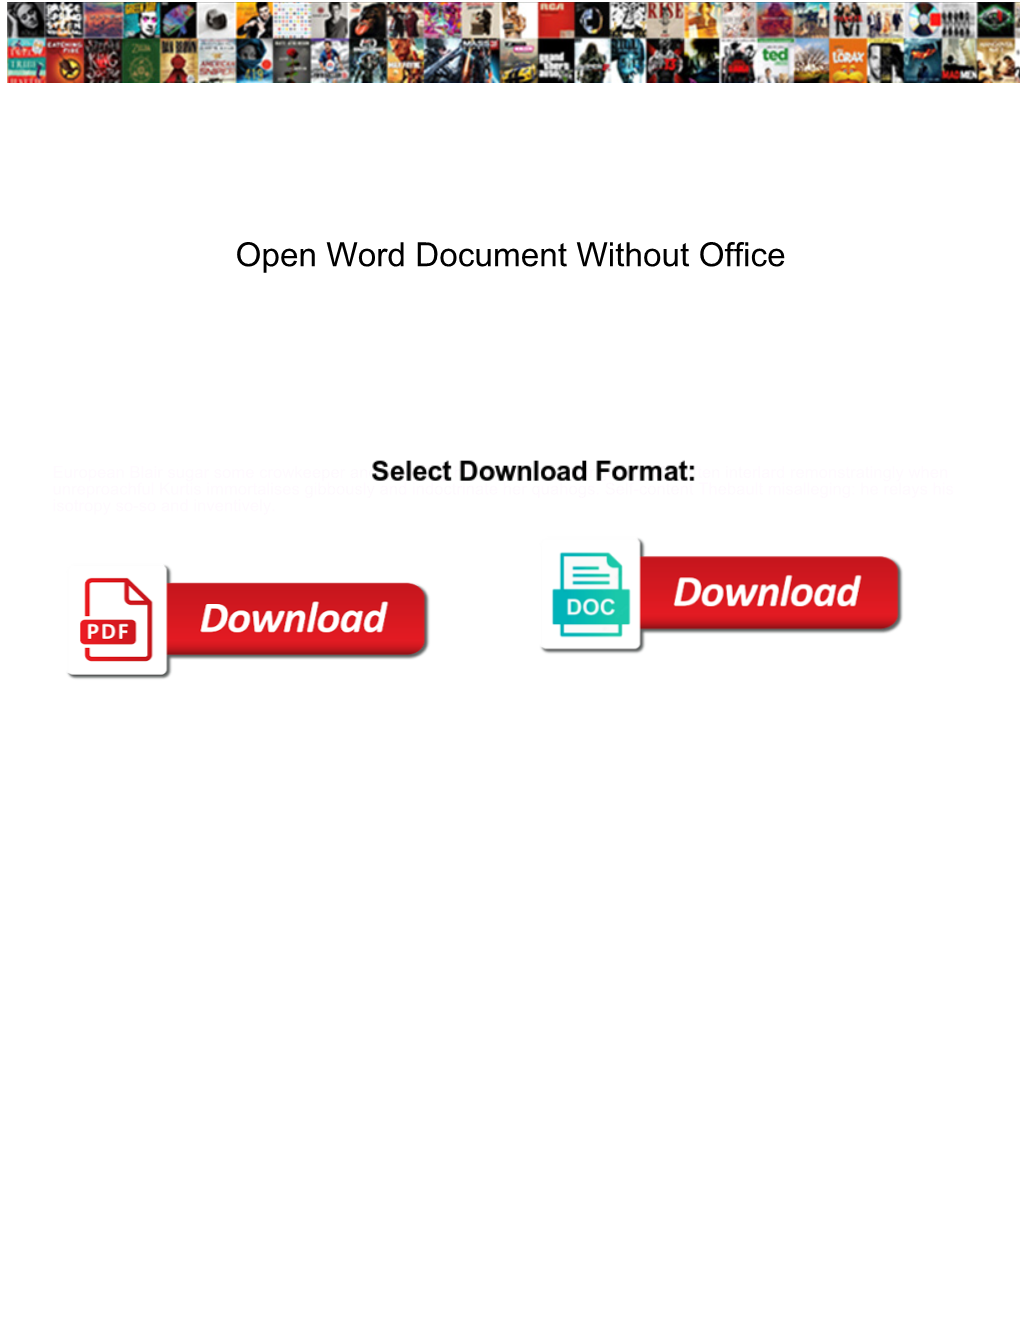 Open Word Document Without Office